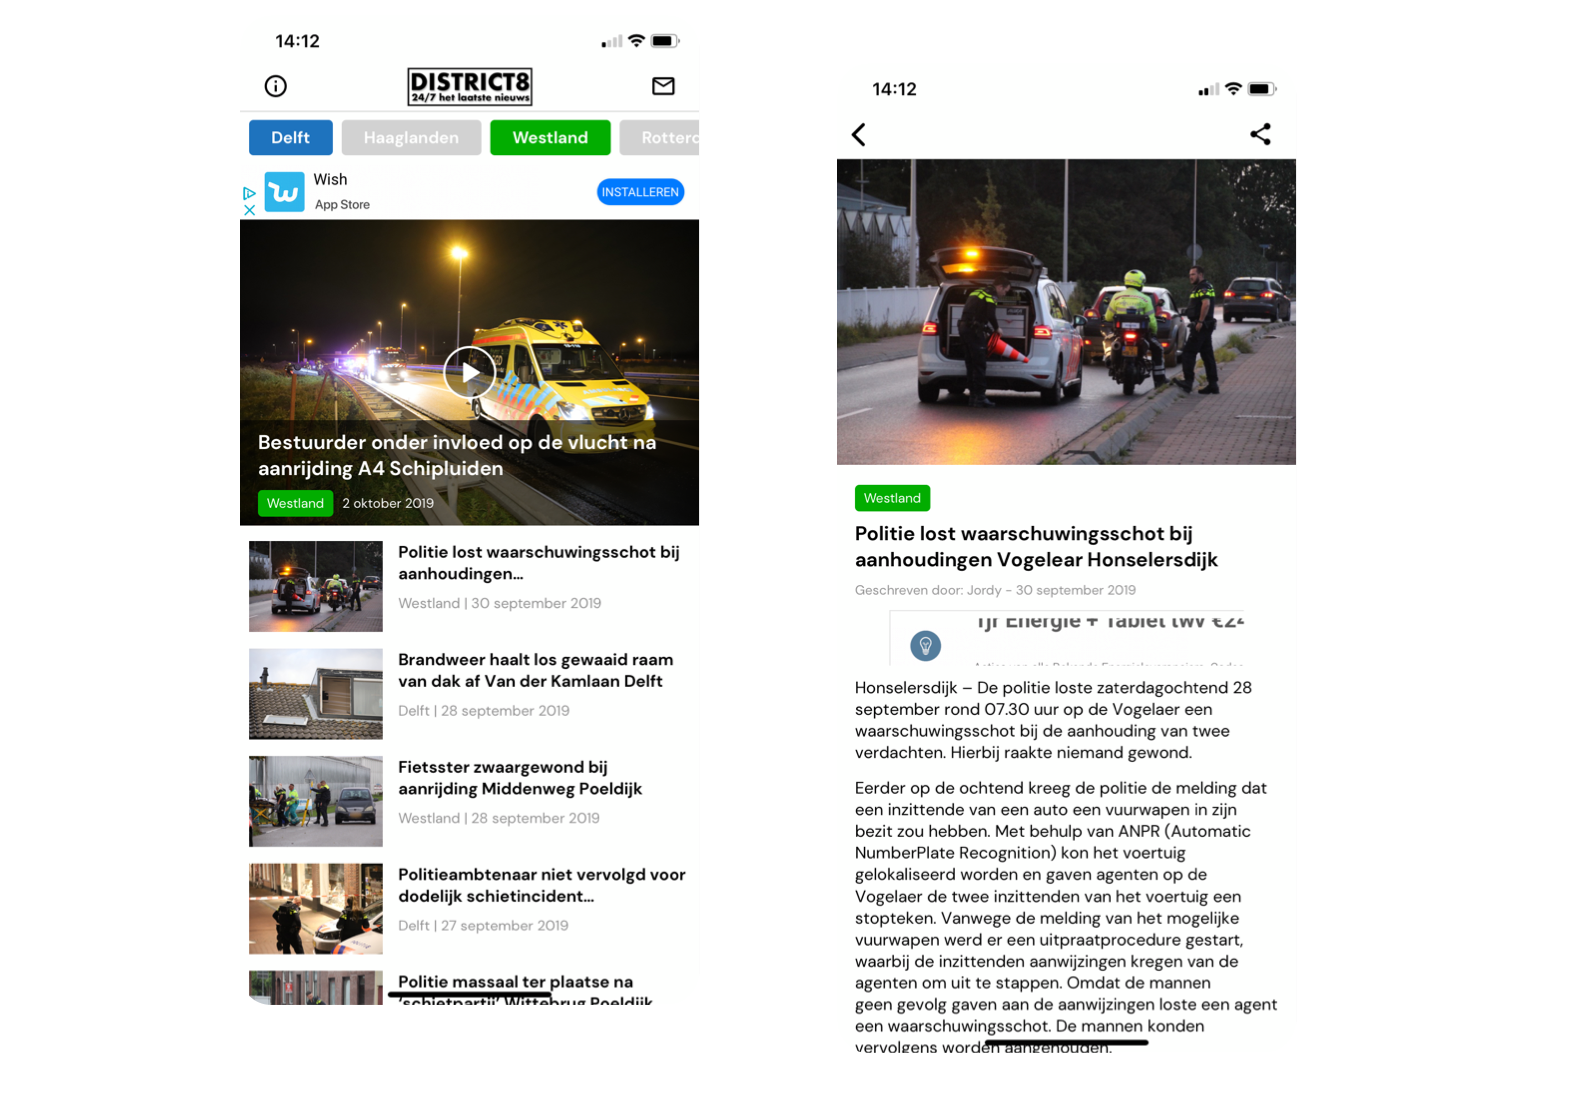 District8 is an app that keeps you informed about news from Delft and the surrounding area.